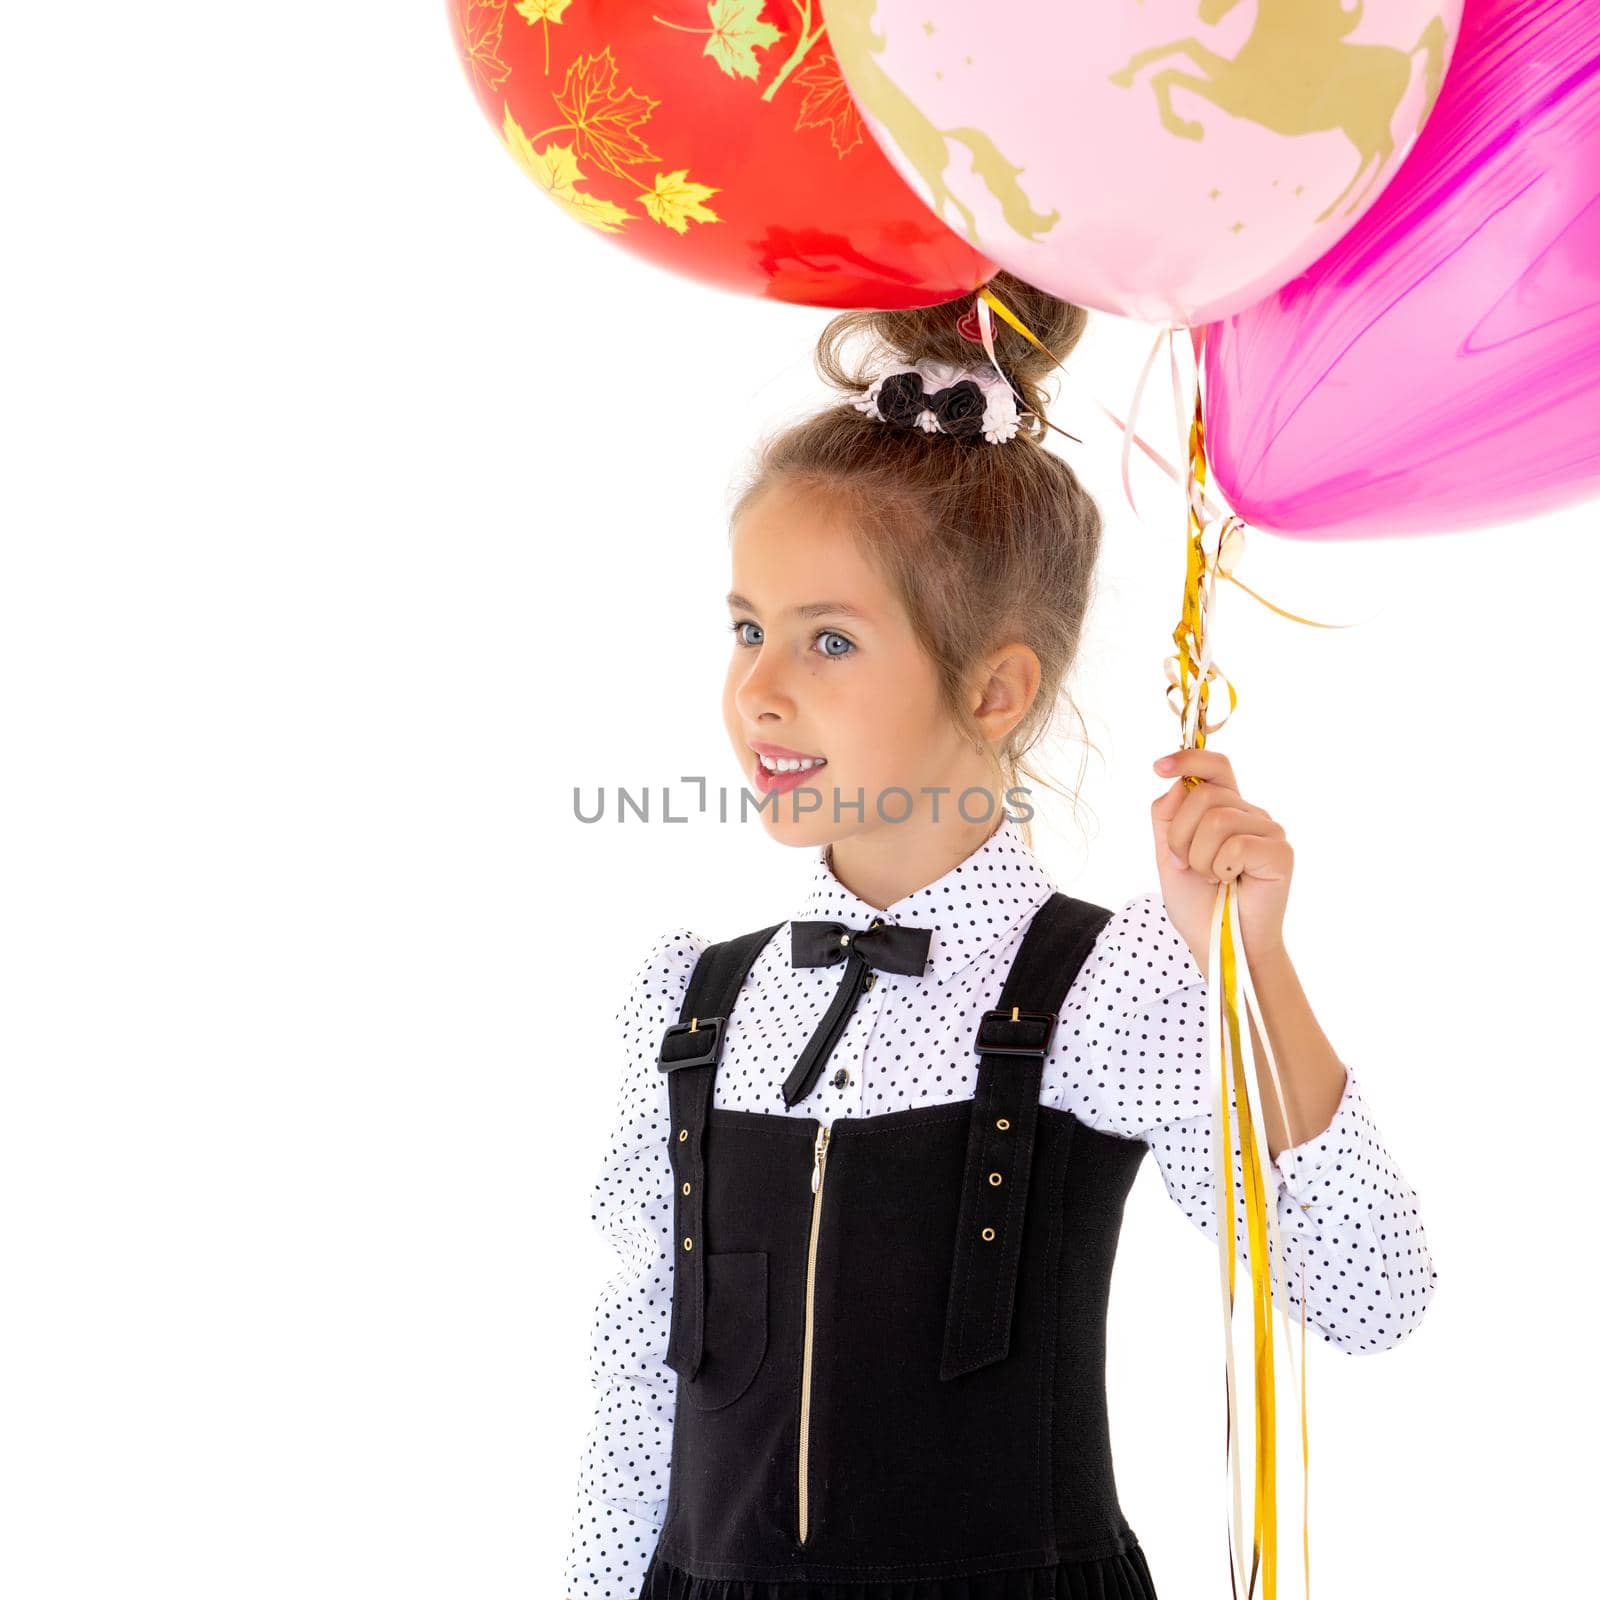 Colorful photo, beautiful girl holding bunch of balloons on white background. The girl is smiling and looking at the camera. Holiday concept, happy childhood.